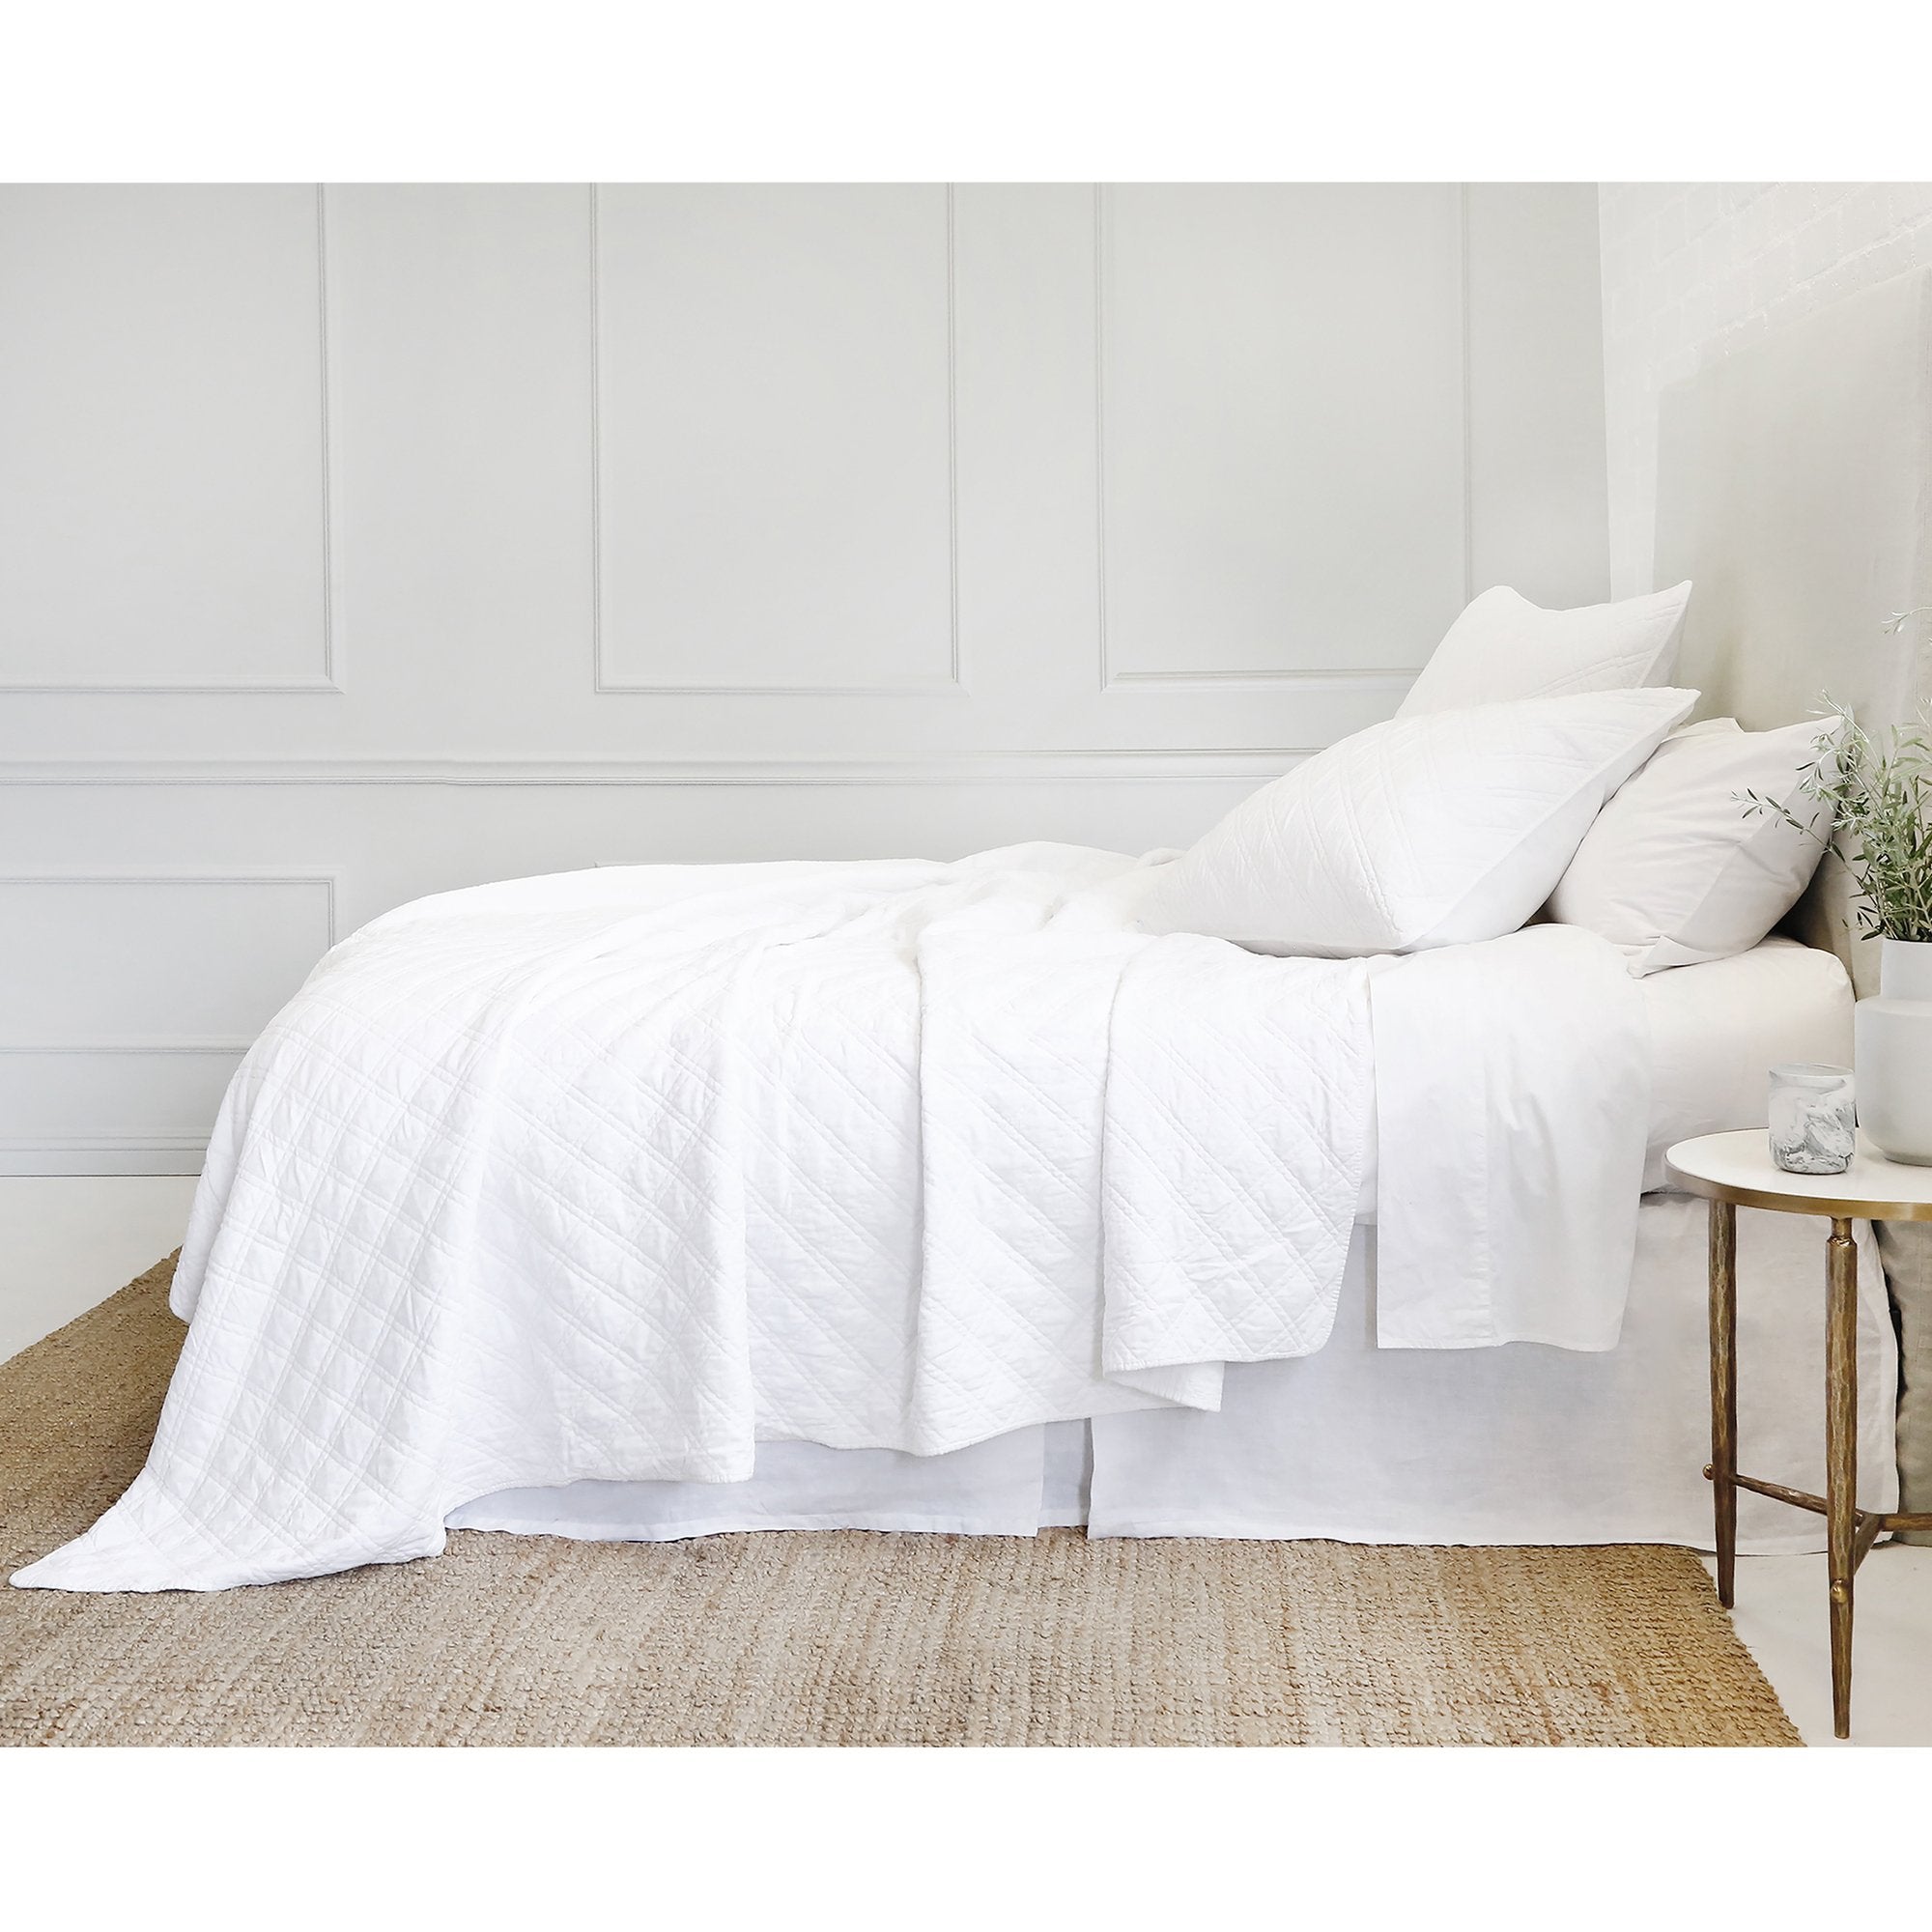 The Brussels Coverlet Bedding White by Pom Pom at Home is a grand and sophisticated line that has a diamond quilted pattern on the front, made of 100% stone washed cotton velvet. Available in several soft, stone washed colors.  100% cotton velvet Machine wash cold; tumble dry low; warm iron as needed Do not bleach